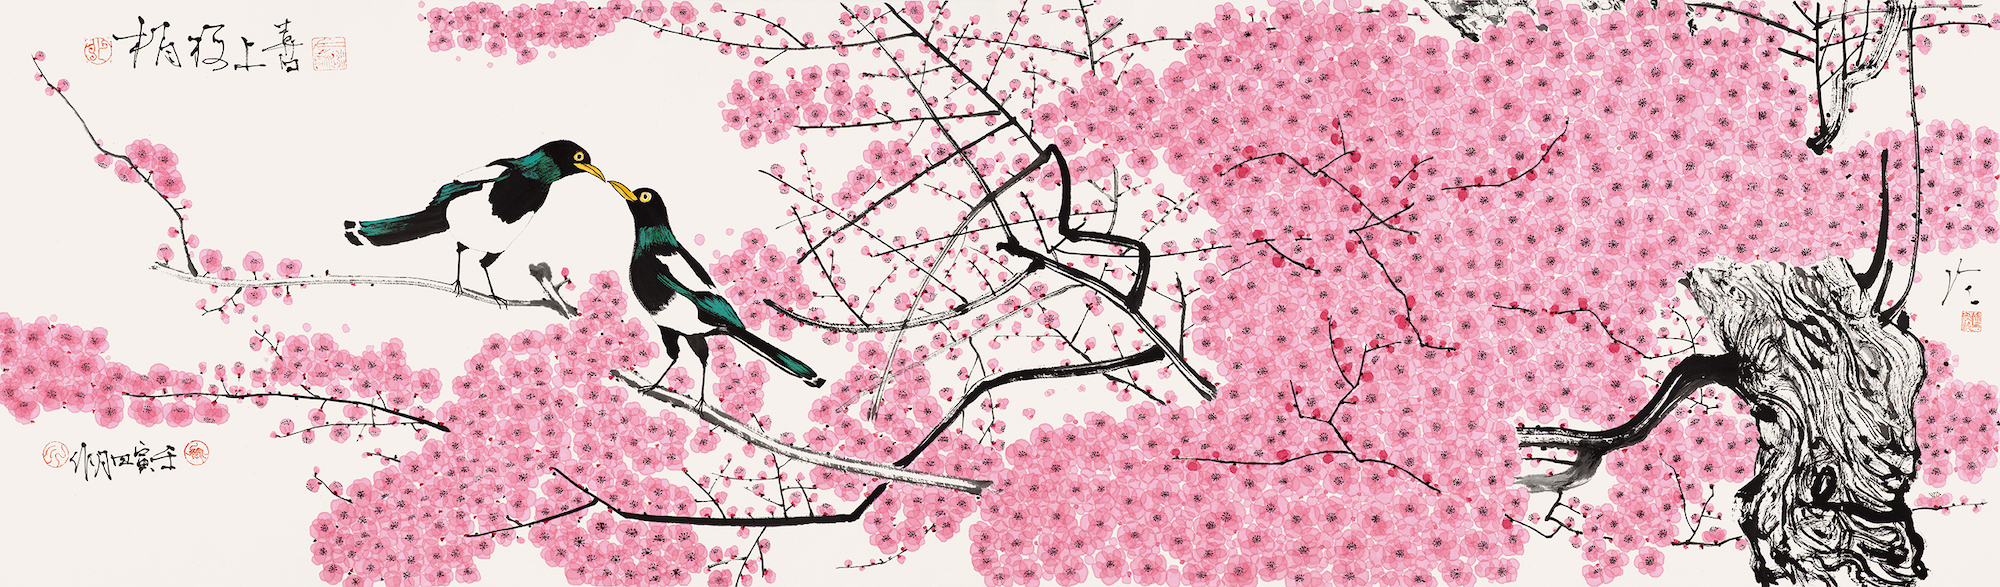 Details of a plum blossom painting by Chen Jialing /Rongbaozhai